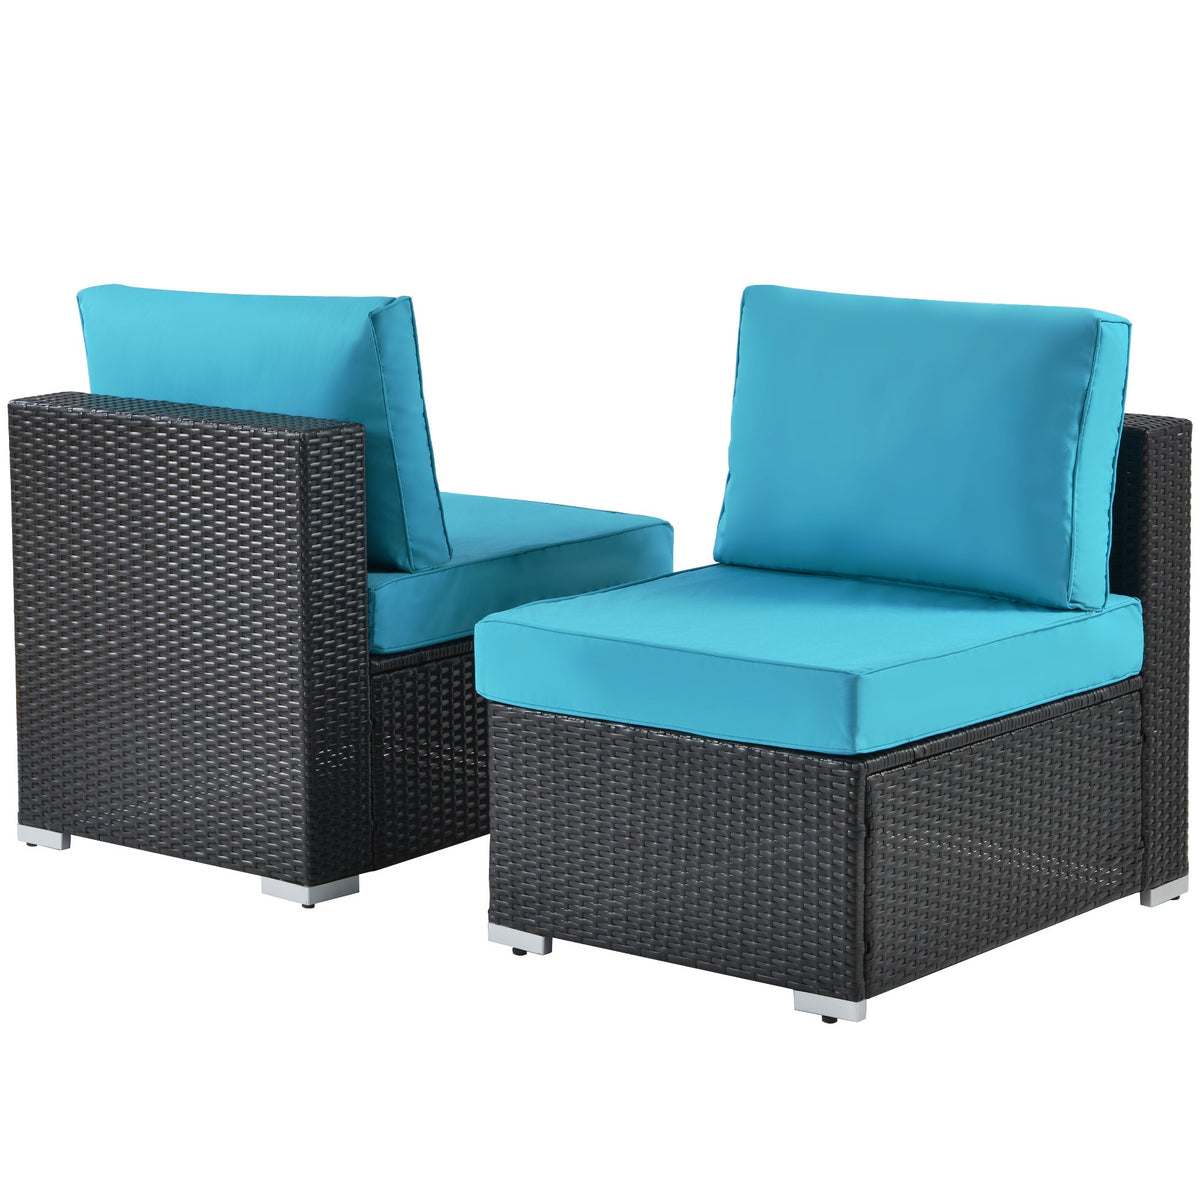 Clearance! Patio Outdoor Furniture Sets, 7 Pieces All-Weather